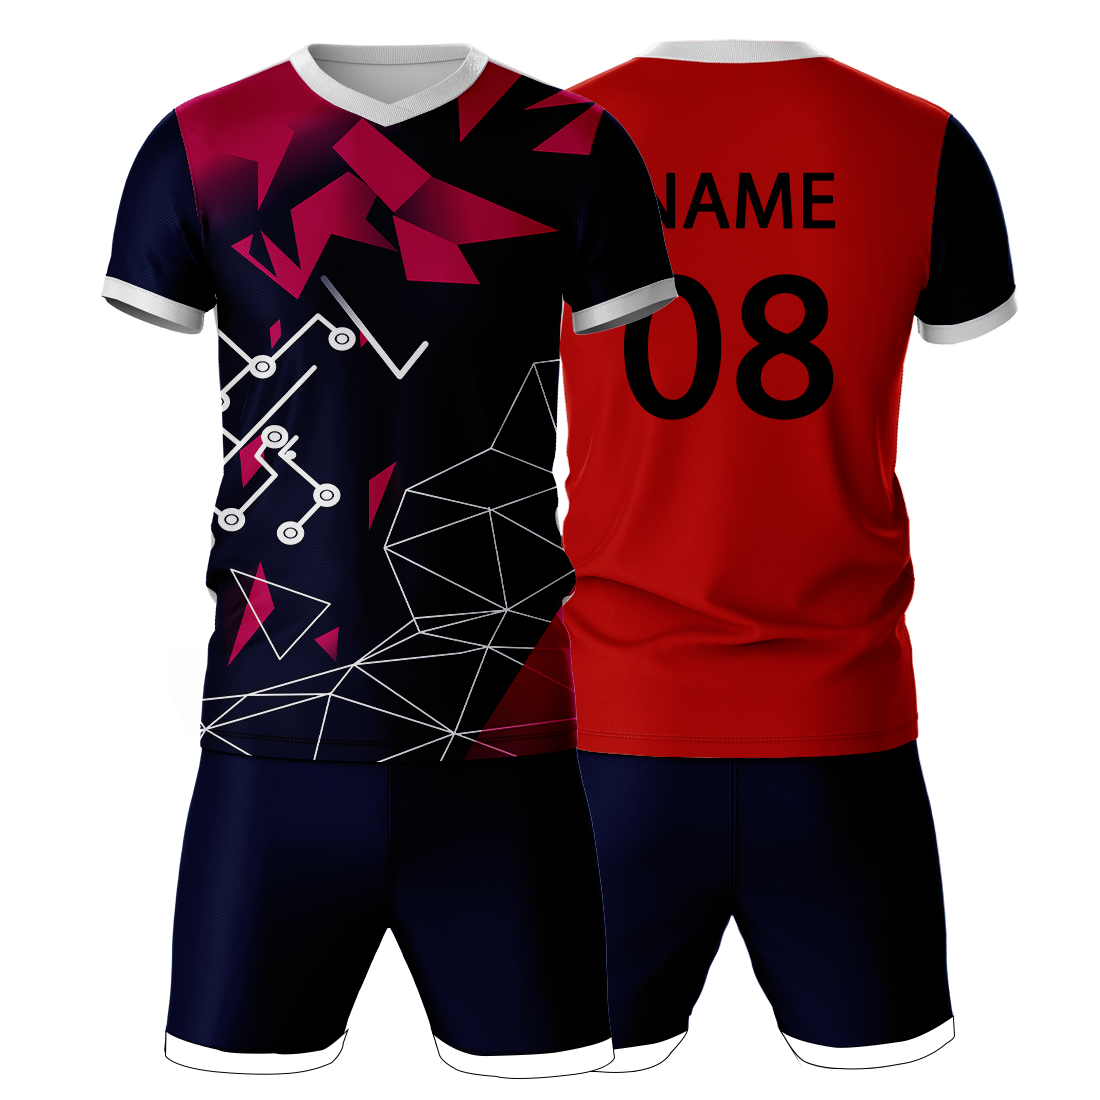 All Over Printed Jersey With Shorts Name & Number Printed.NP50000658